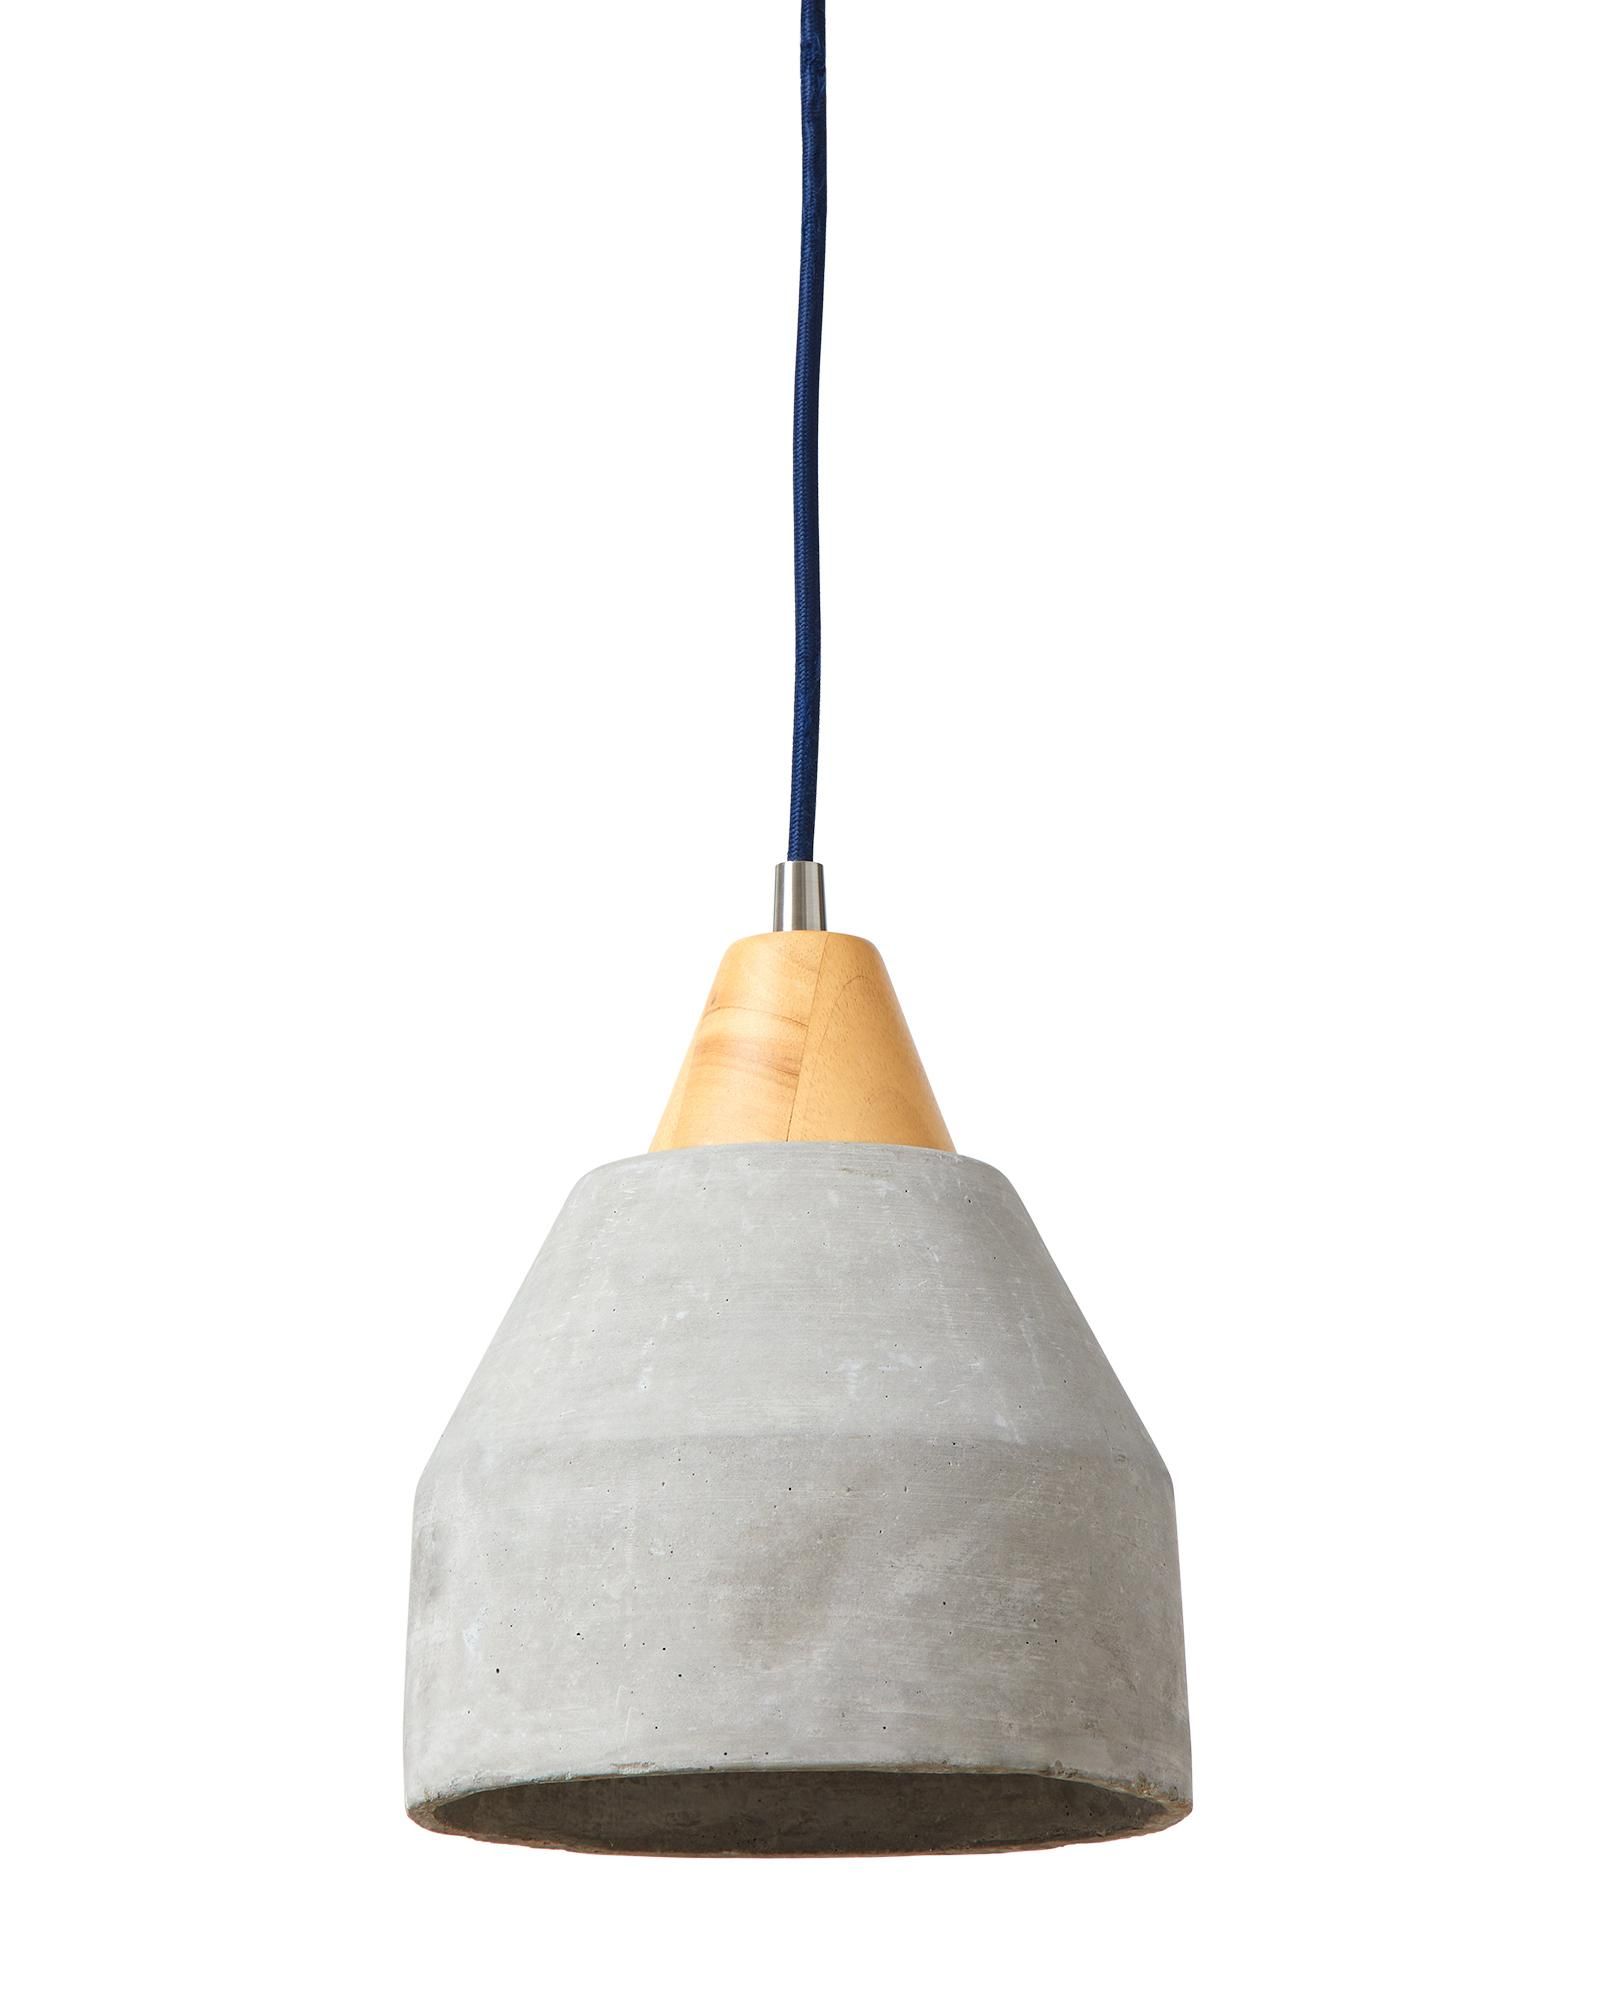 Knolls Wood Trimmed Pendant | Serena and Lily